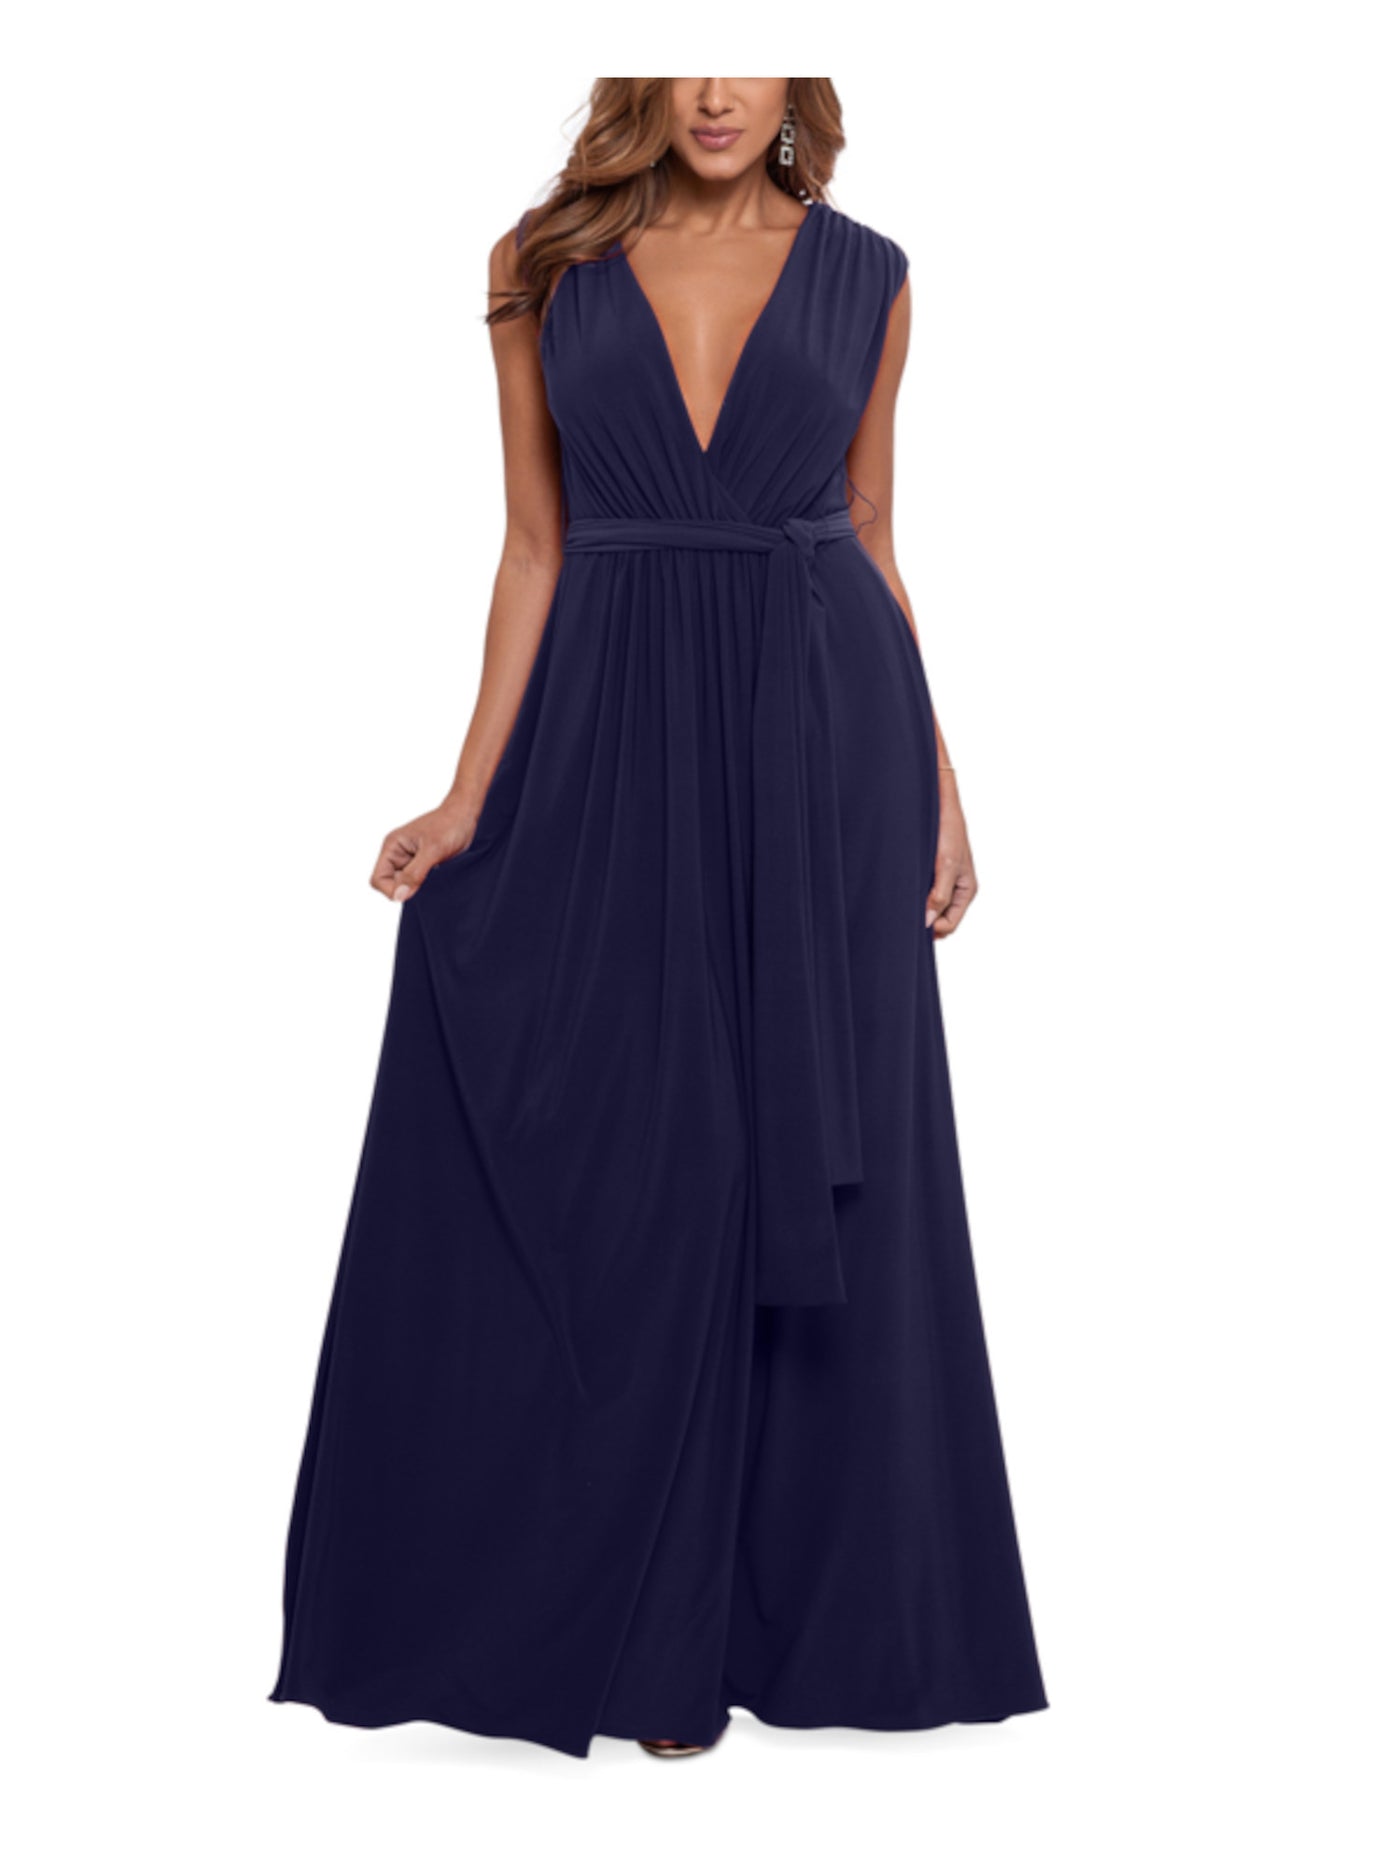 BETSY & ADAM Womens Navy Ruched Tie Waist Lined Cap Sleeve V Neck Full-Length Formal Gown Dress 6